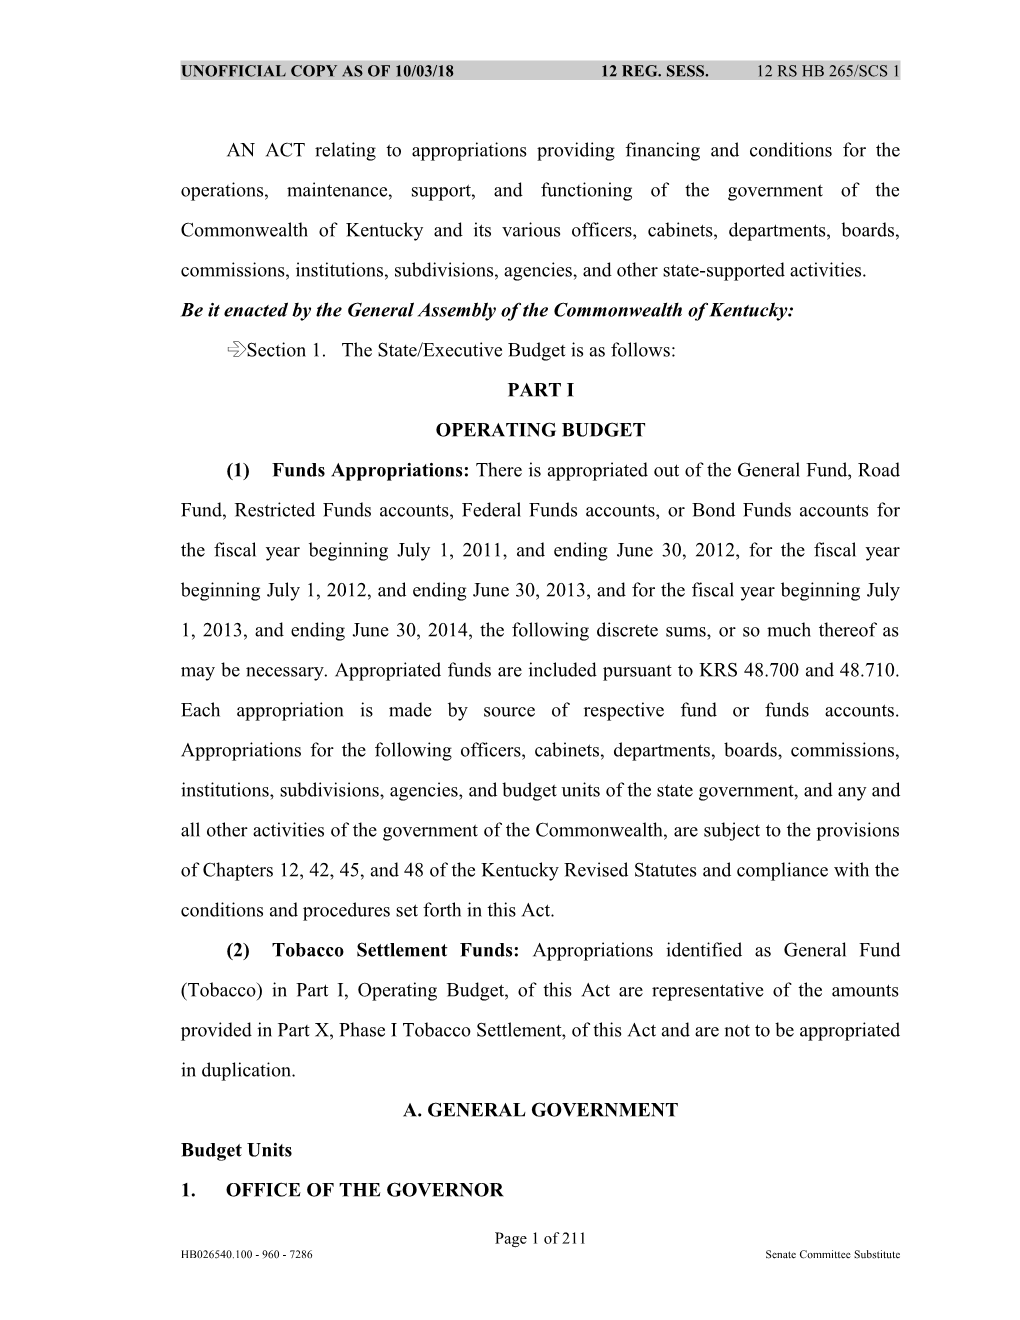 AN ACT Relating to Appropriations Providing Financing and Conditions for the Operations